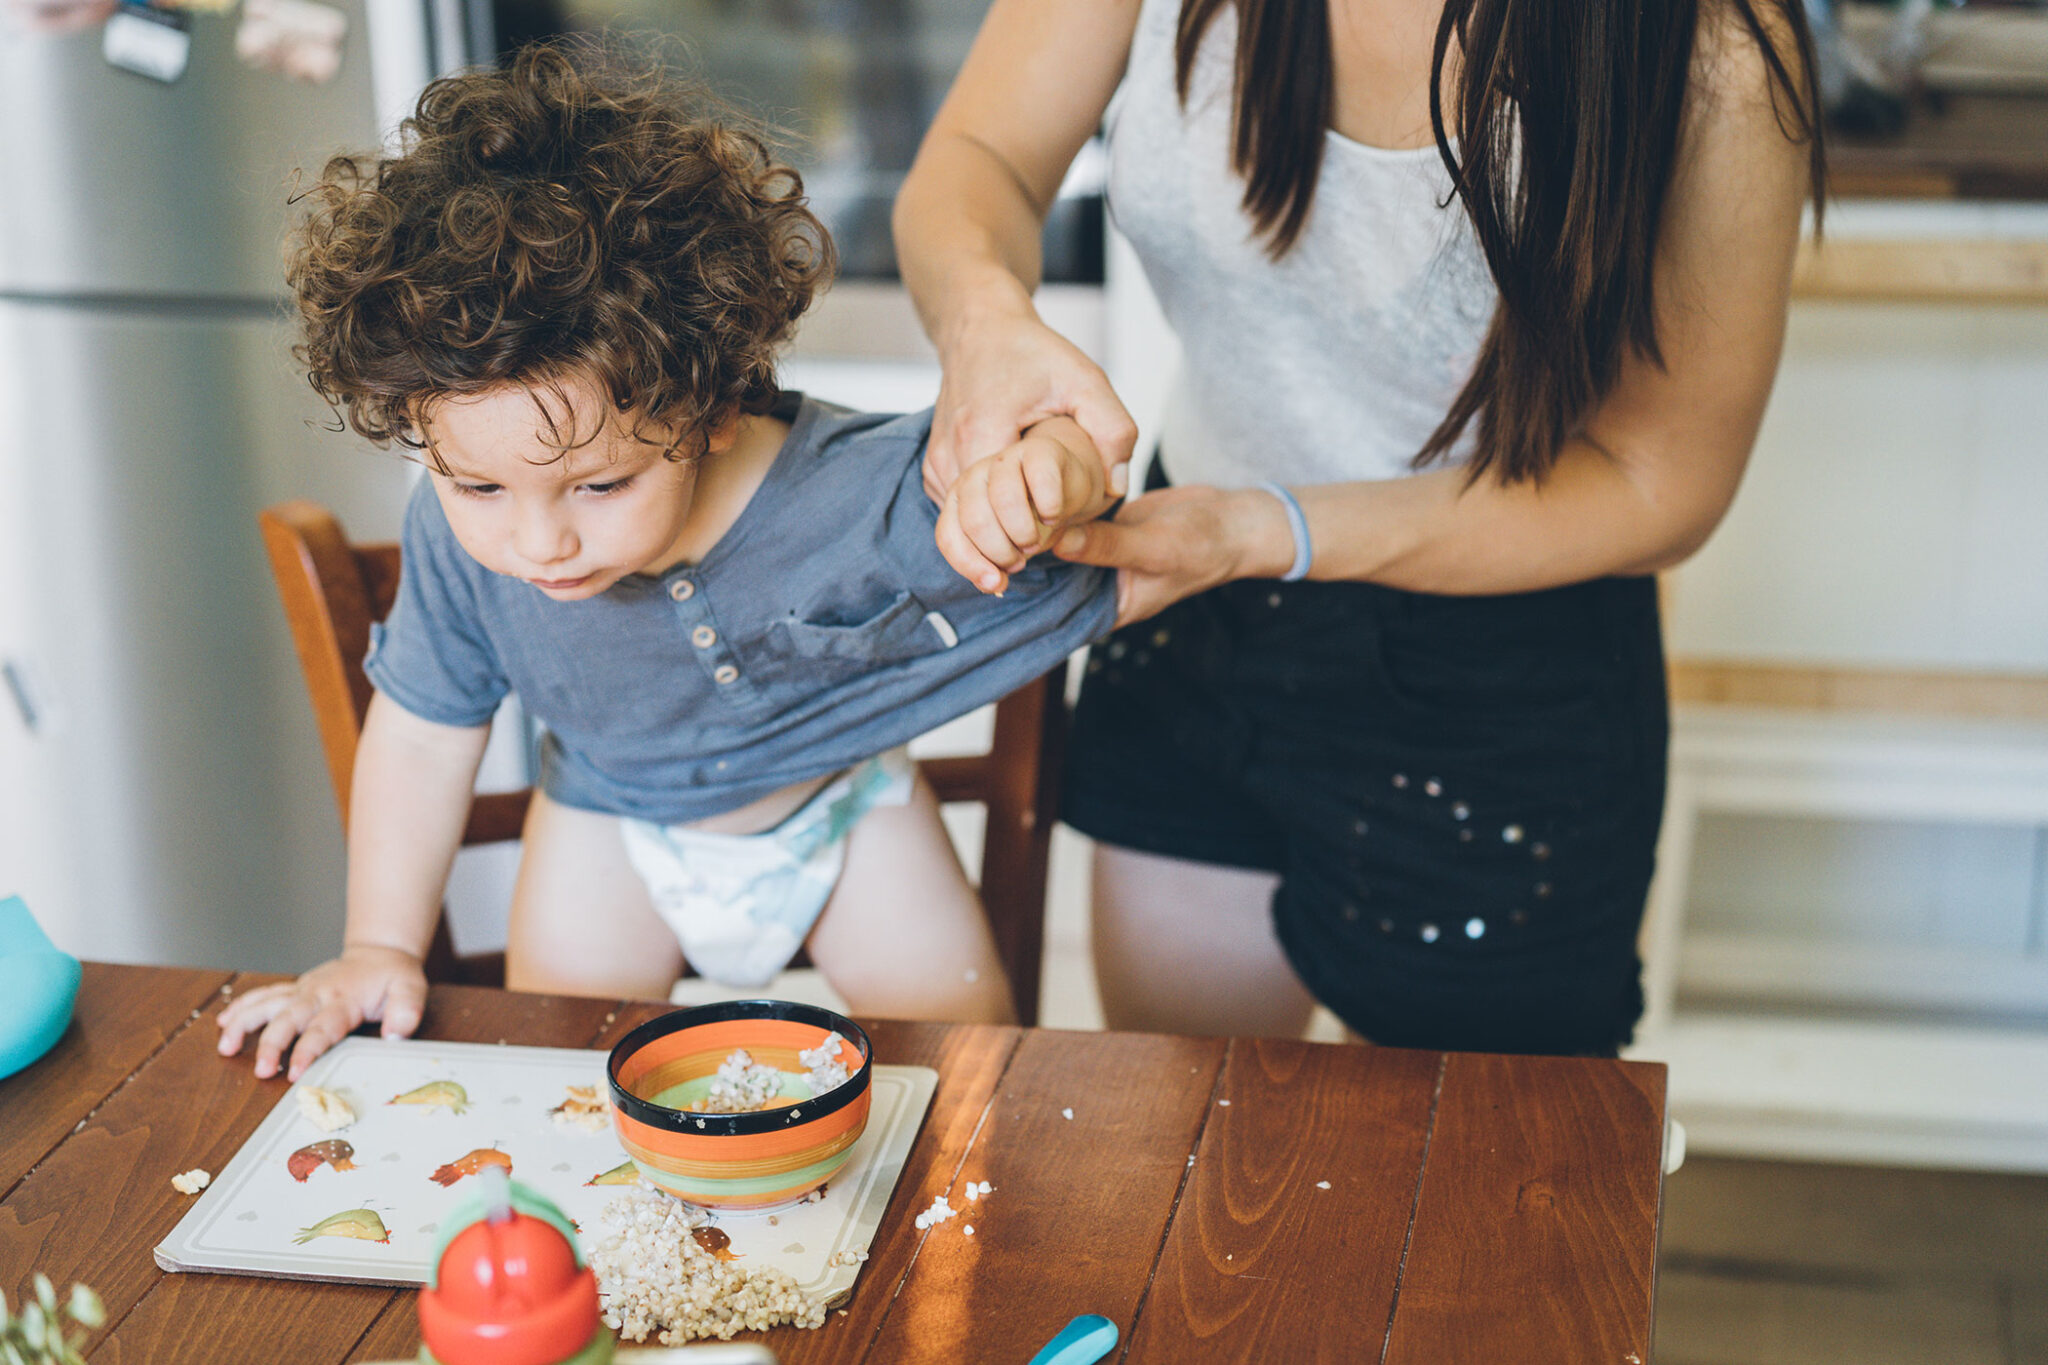 Parents are overwhelmed. It may affect their kids’ relationship with food